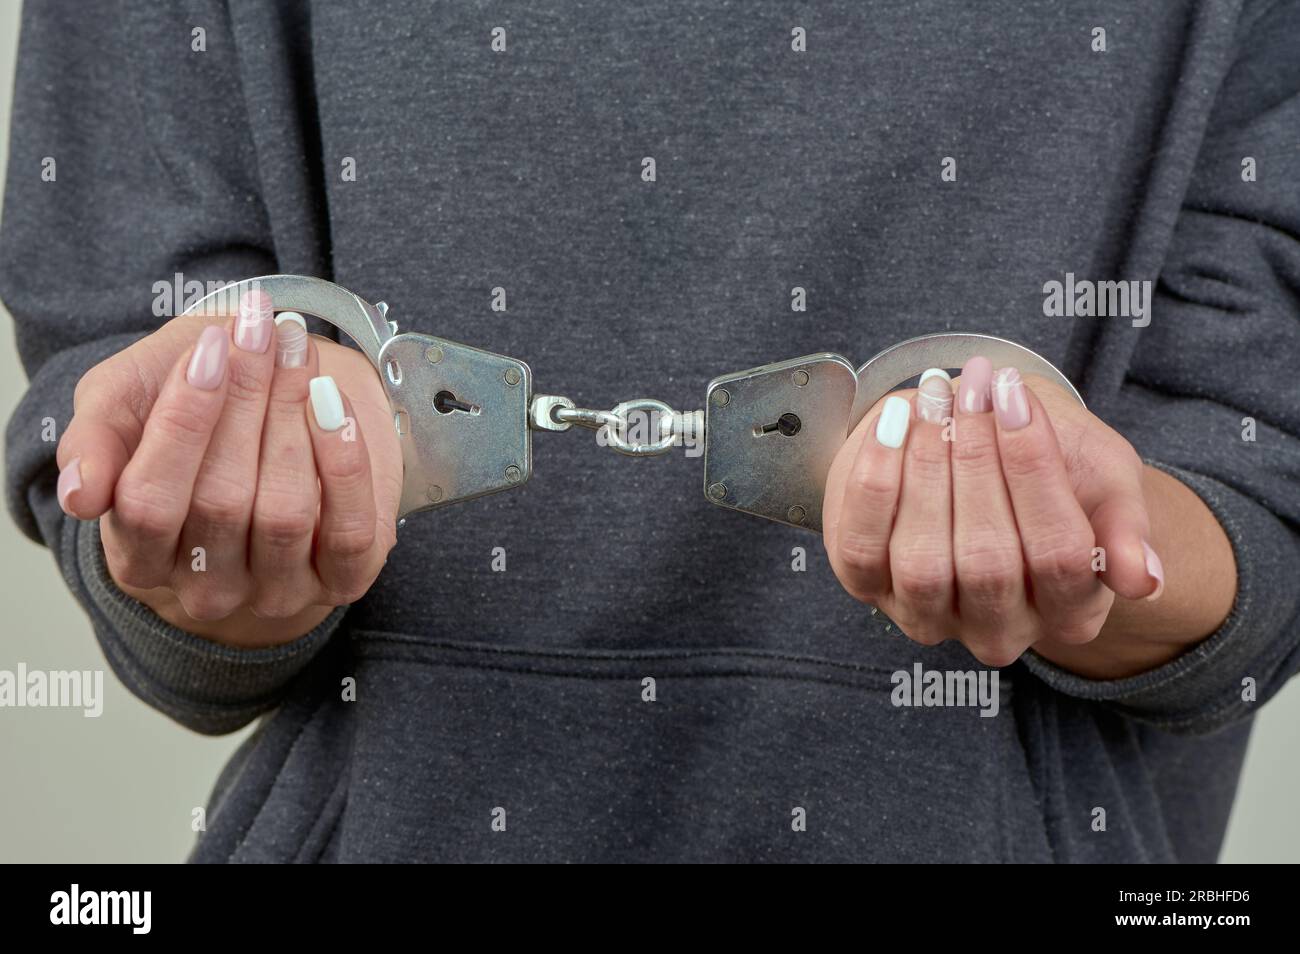 women's hands are handcuffed in close-up Stock Photo